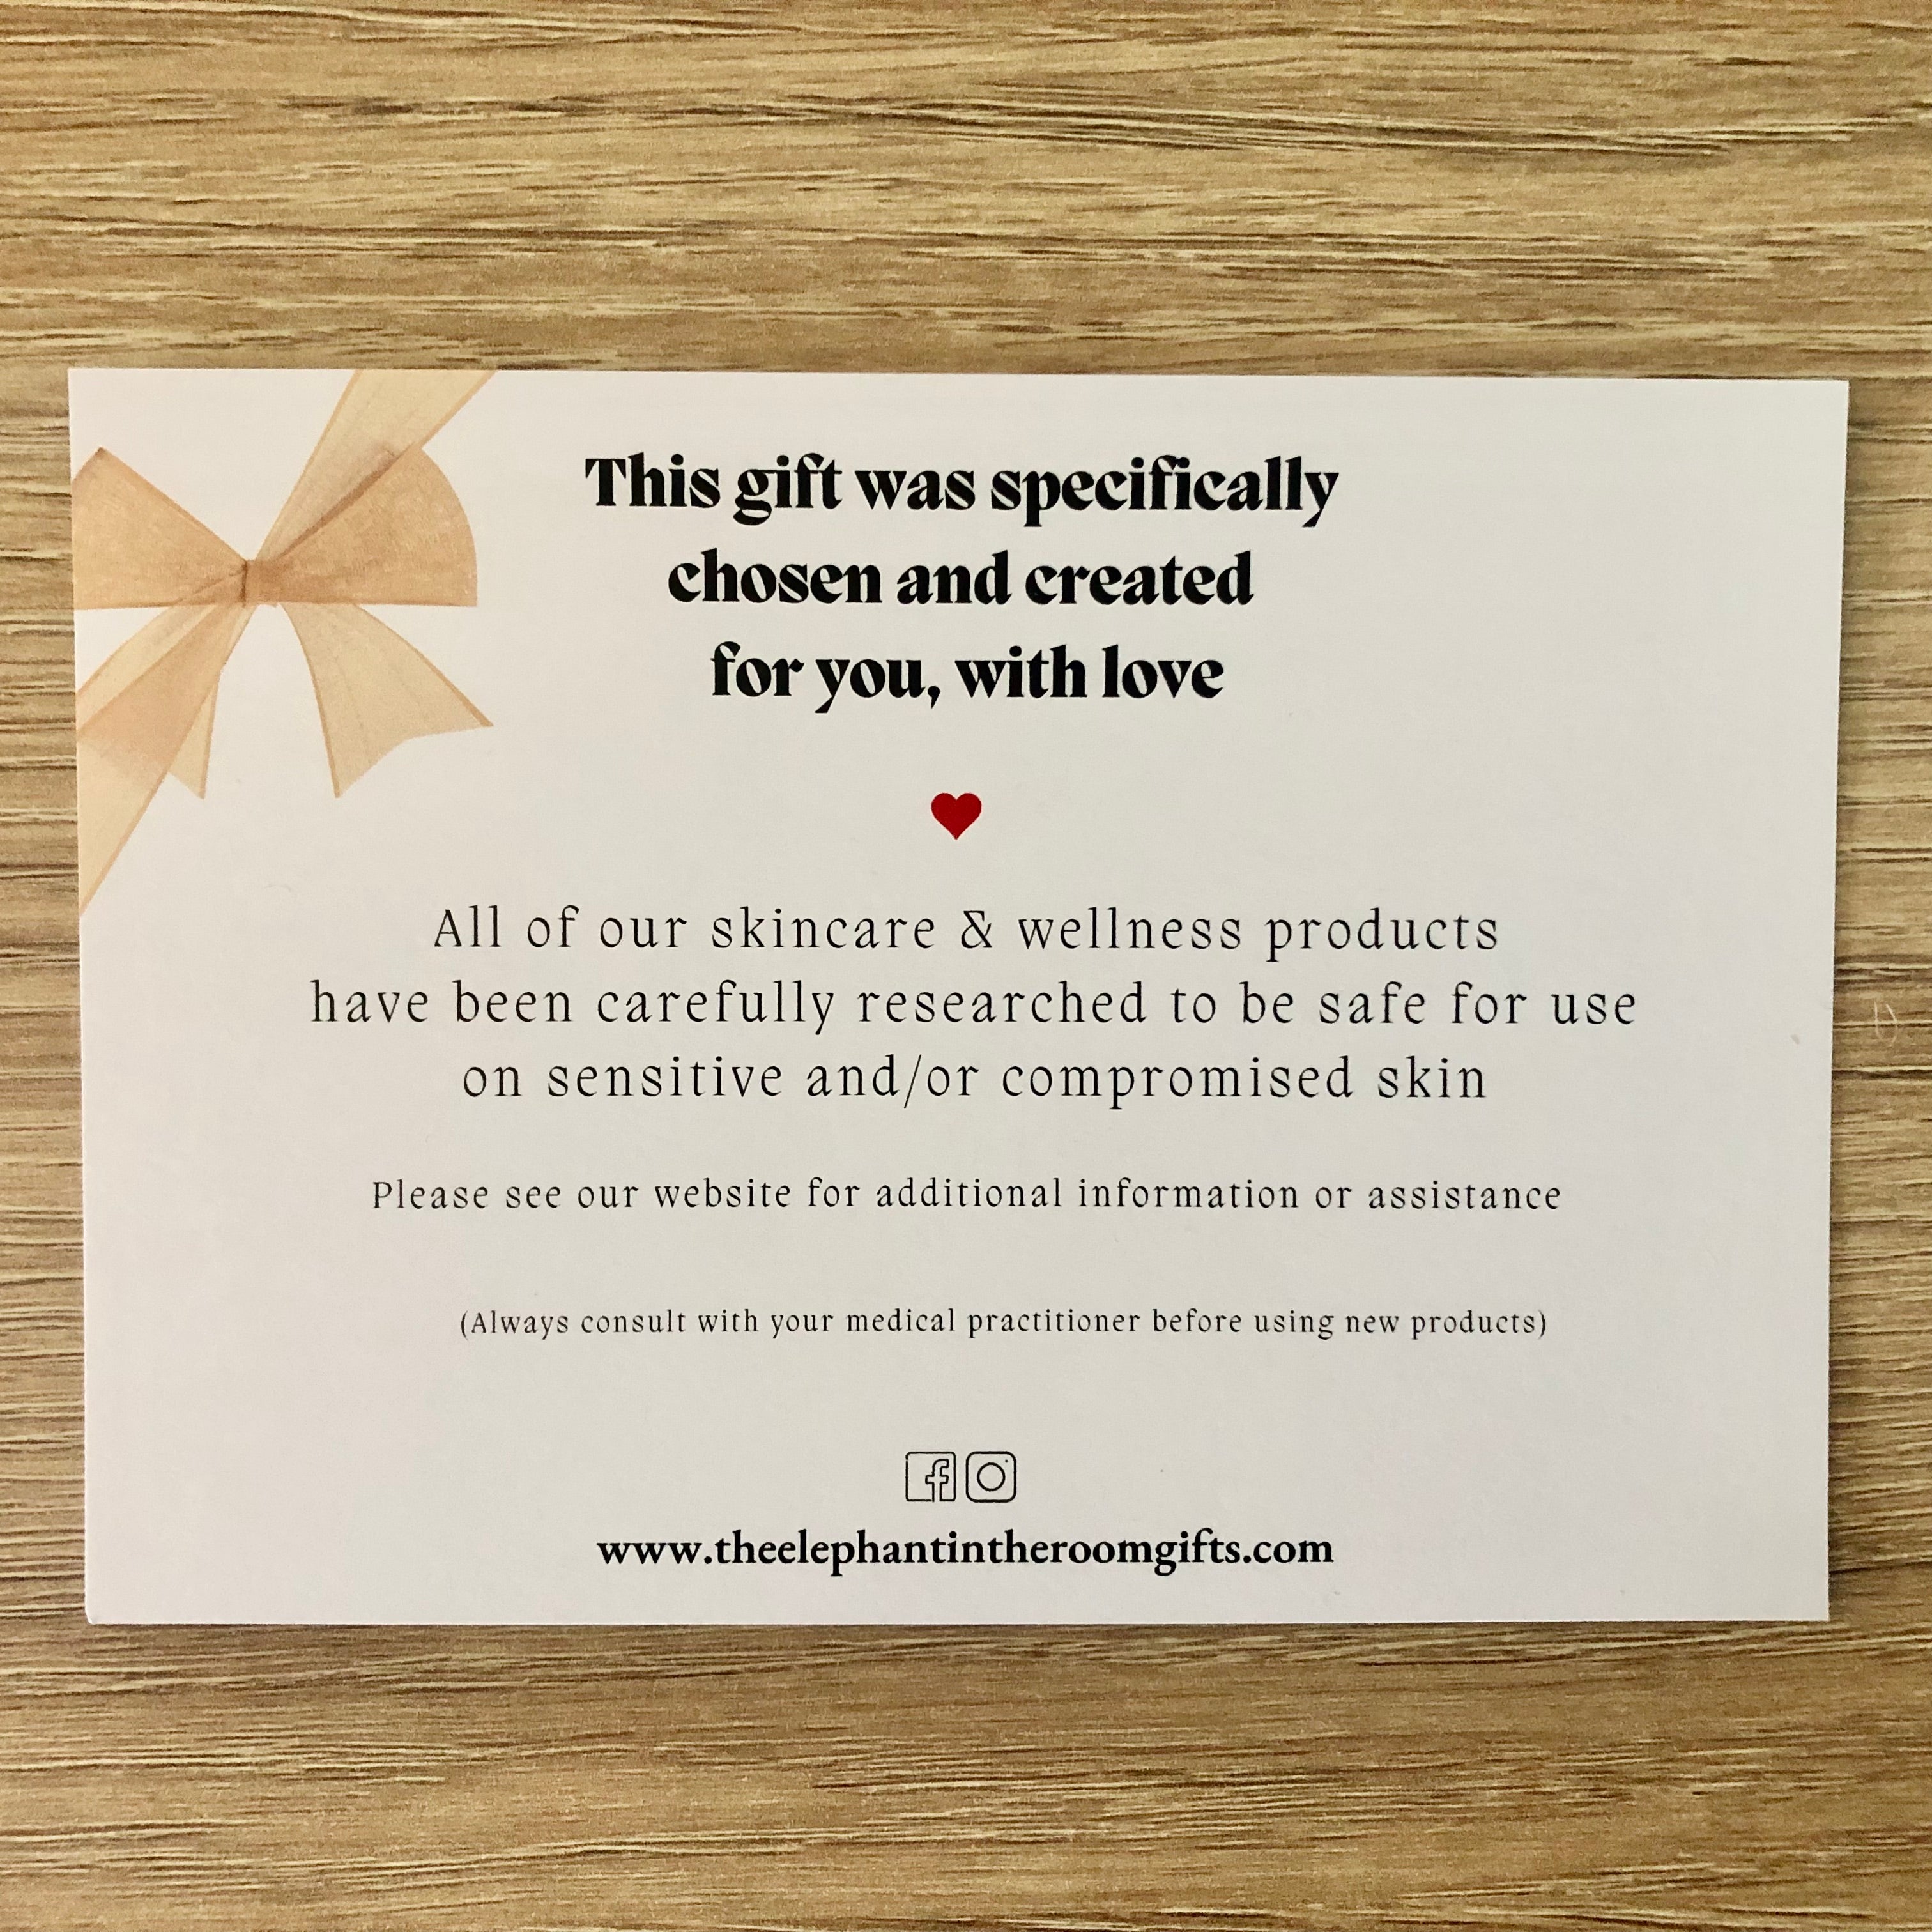 Leaflet with care package explaining that all gifts are suitable for sensitive skin